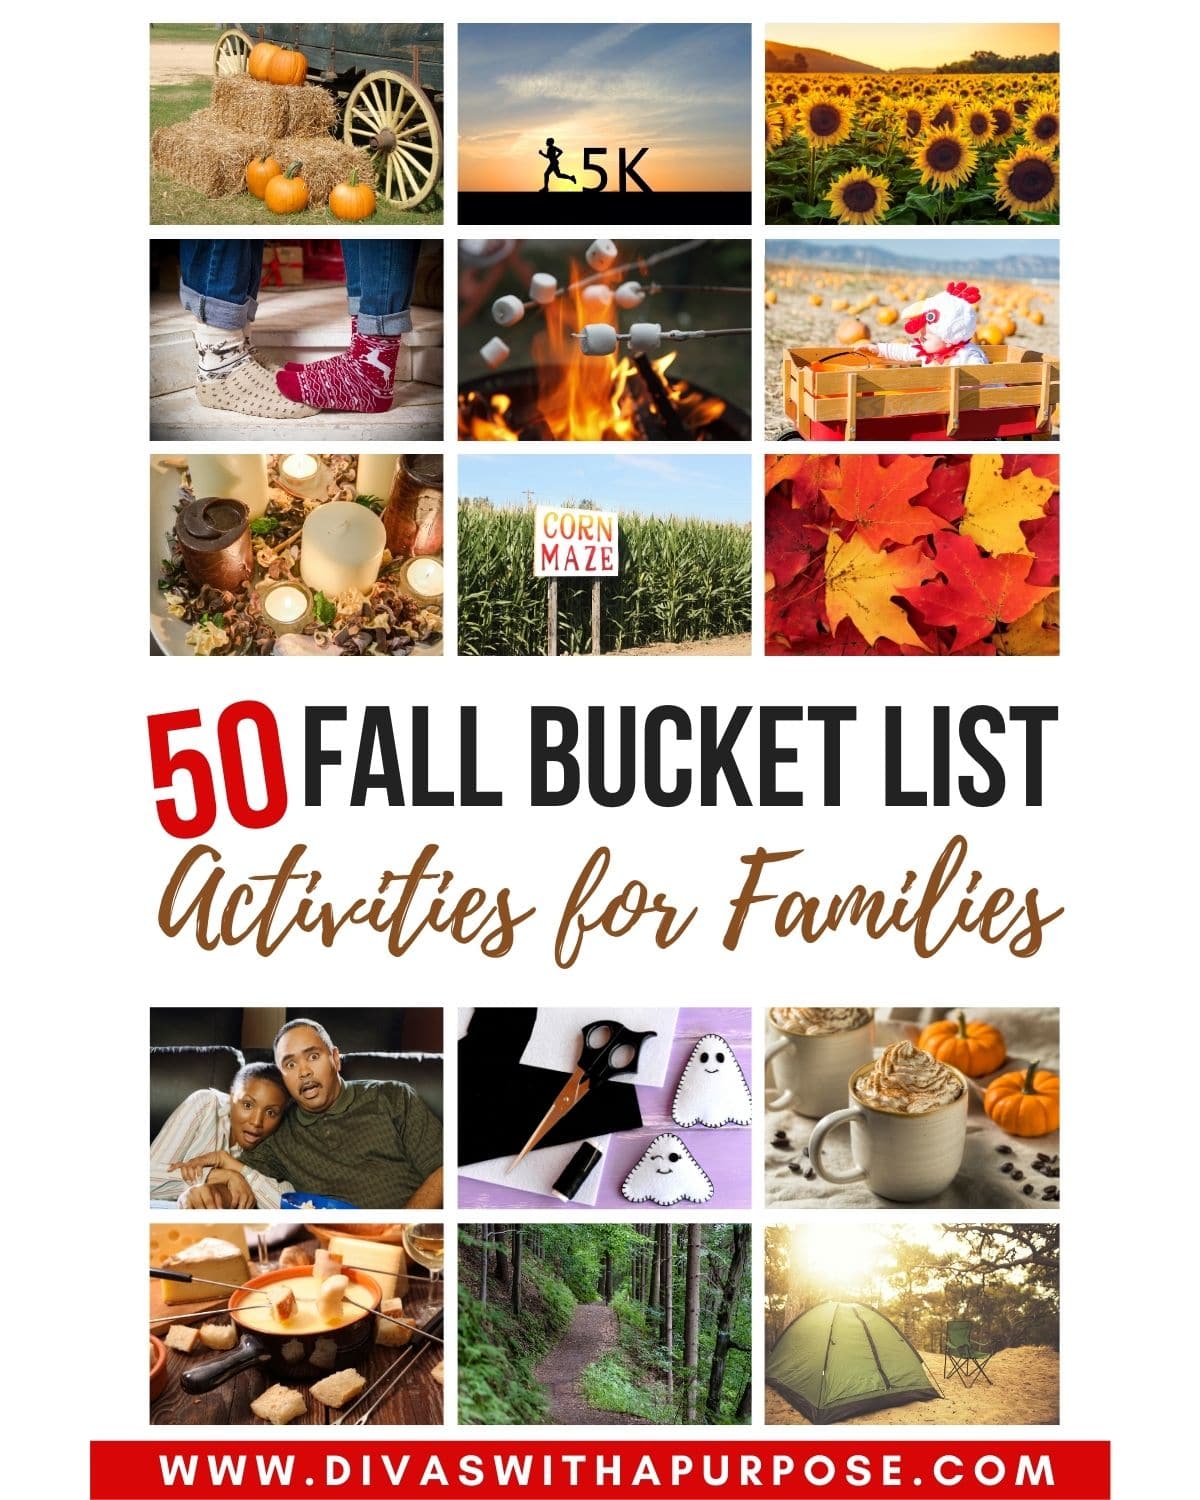 How many items will you cross of your fall bucket list?